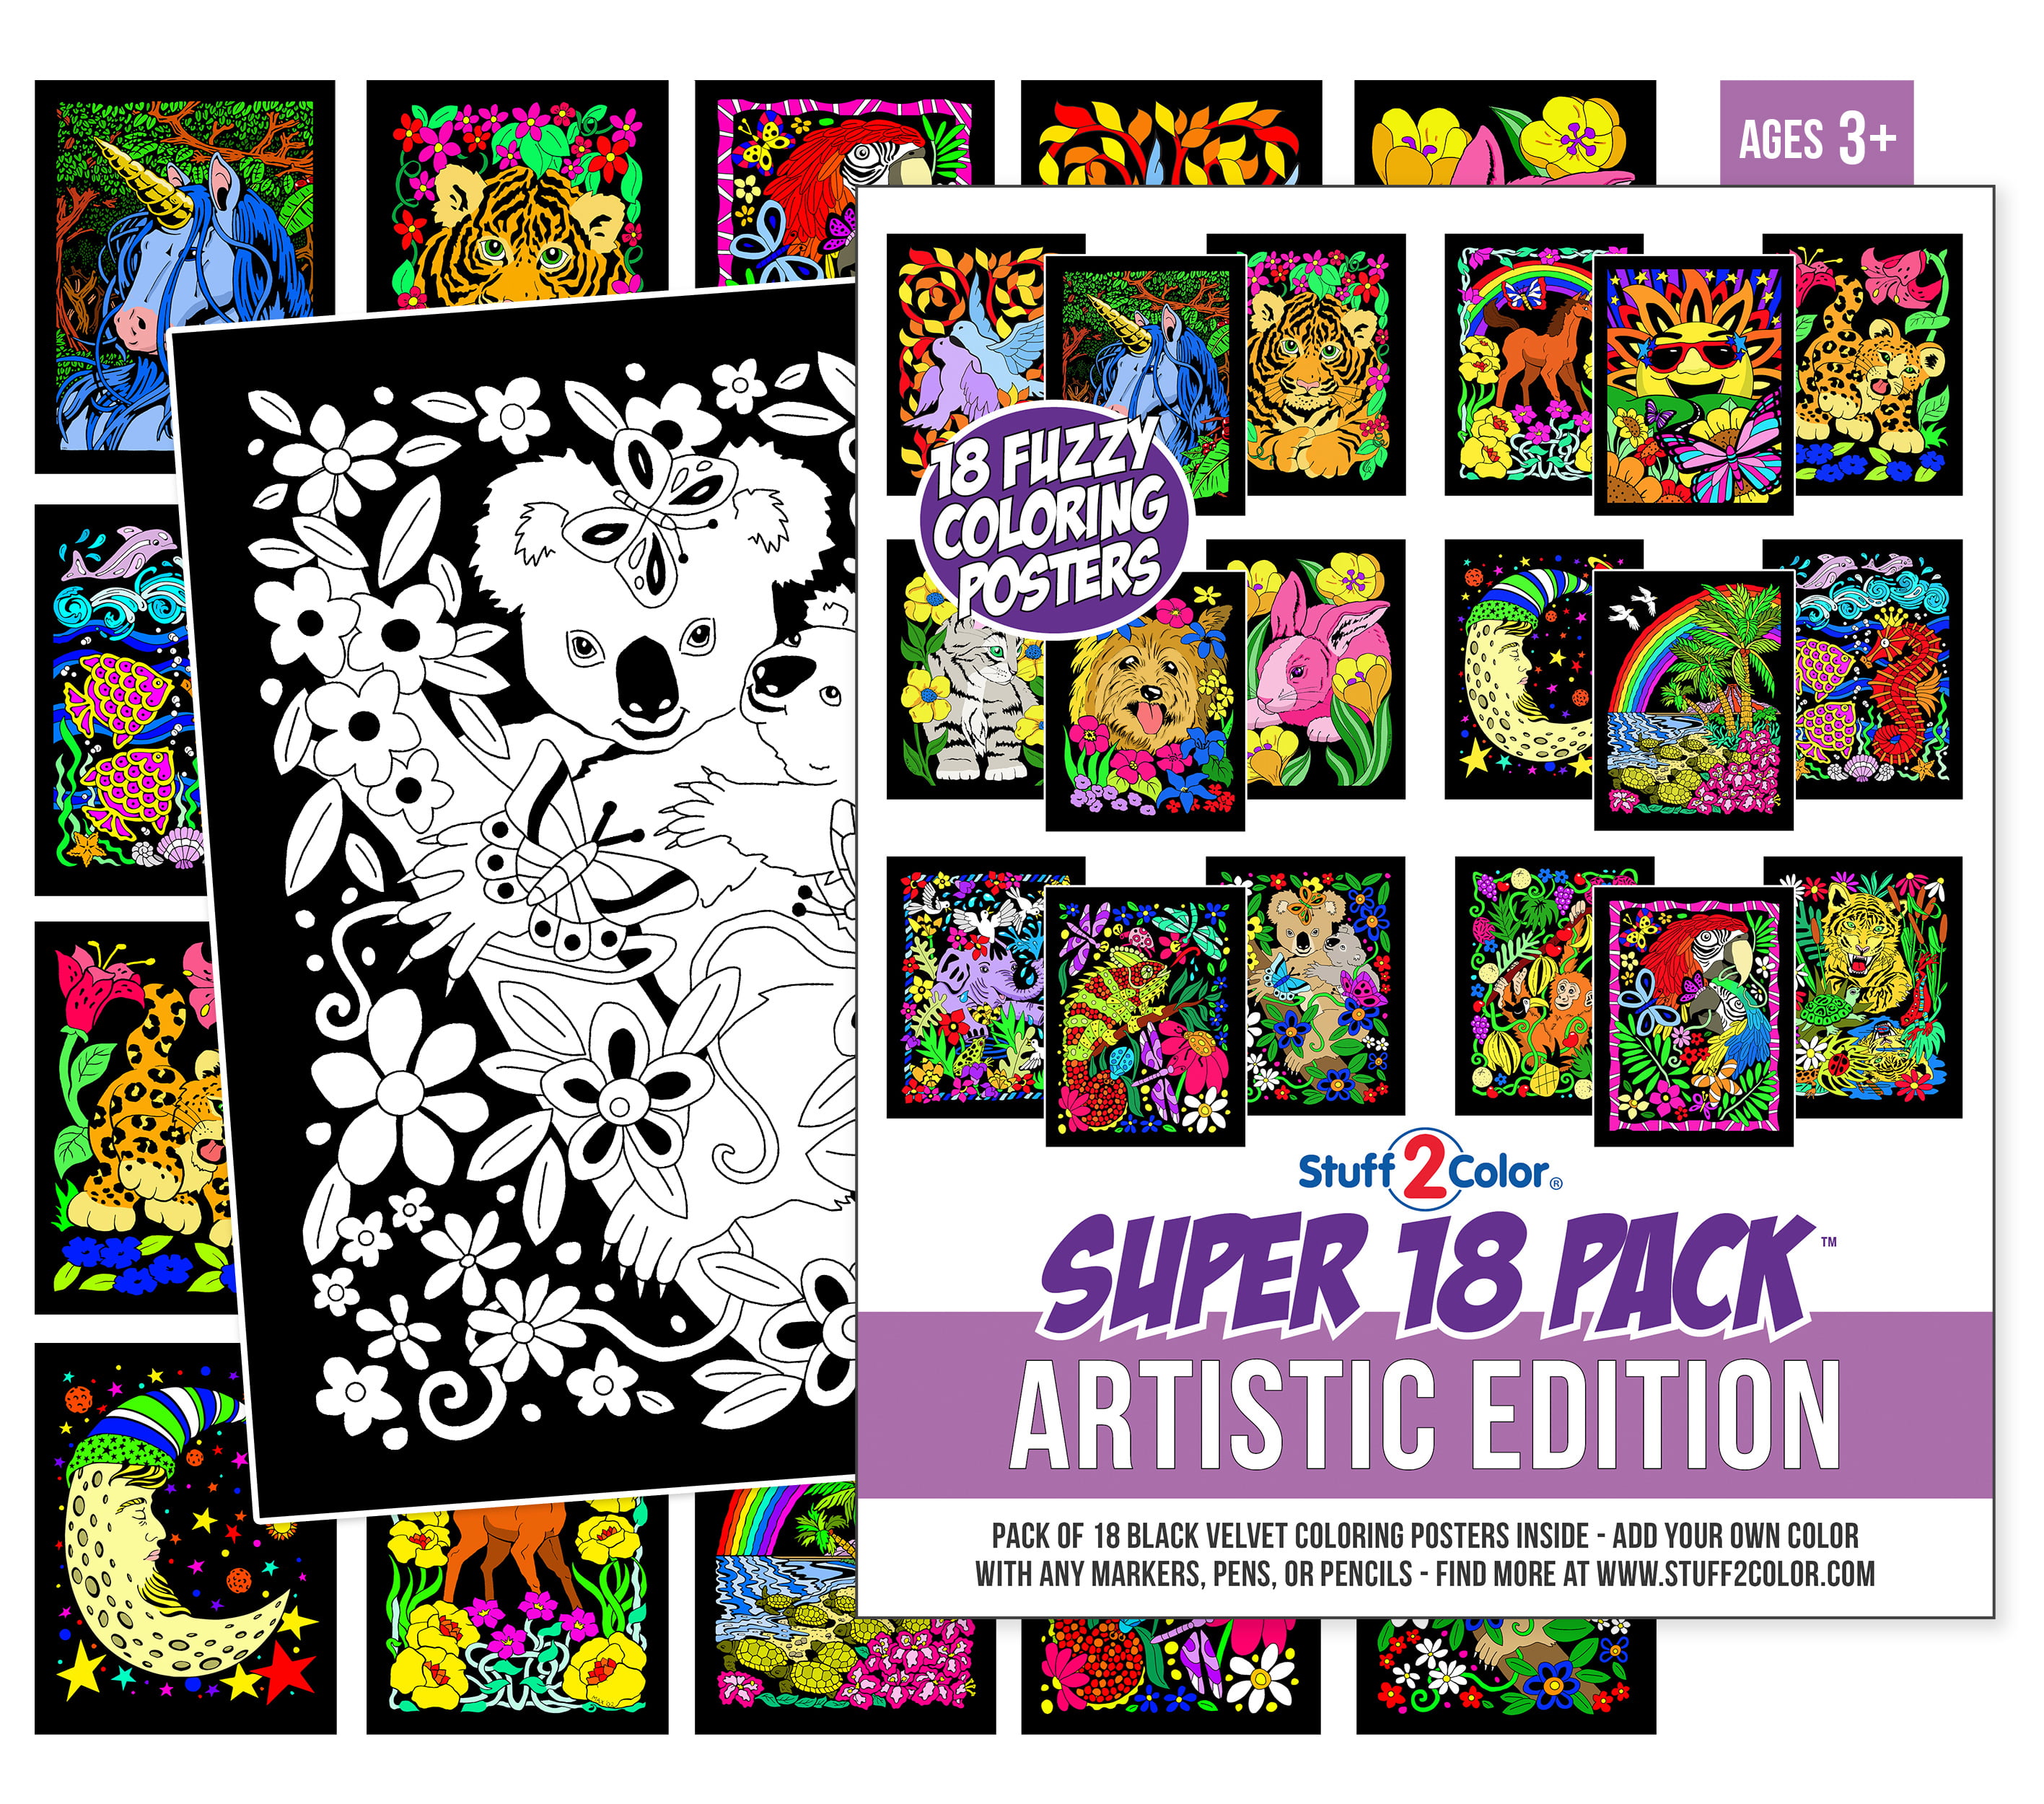 S&S Worldwide Velvet Art to Go! 2 Spiral Bound Coloring Books w/Perforated  Cardstock Pages, Fuzzy, Felt, Great for Travel: Planes, Cars, Backpacks, 20